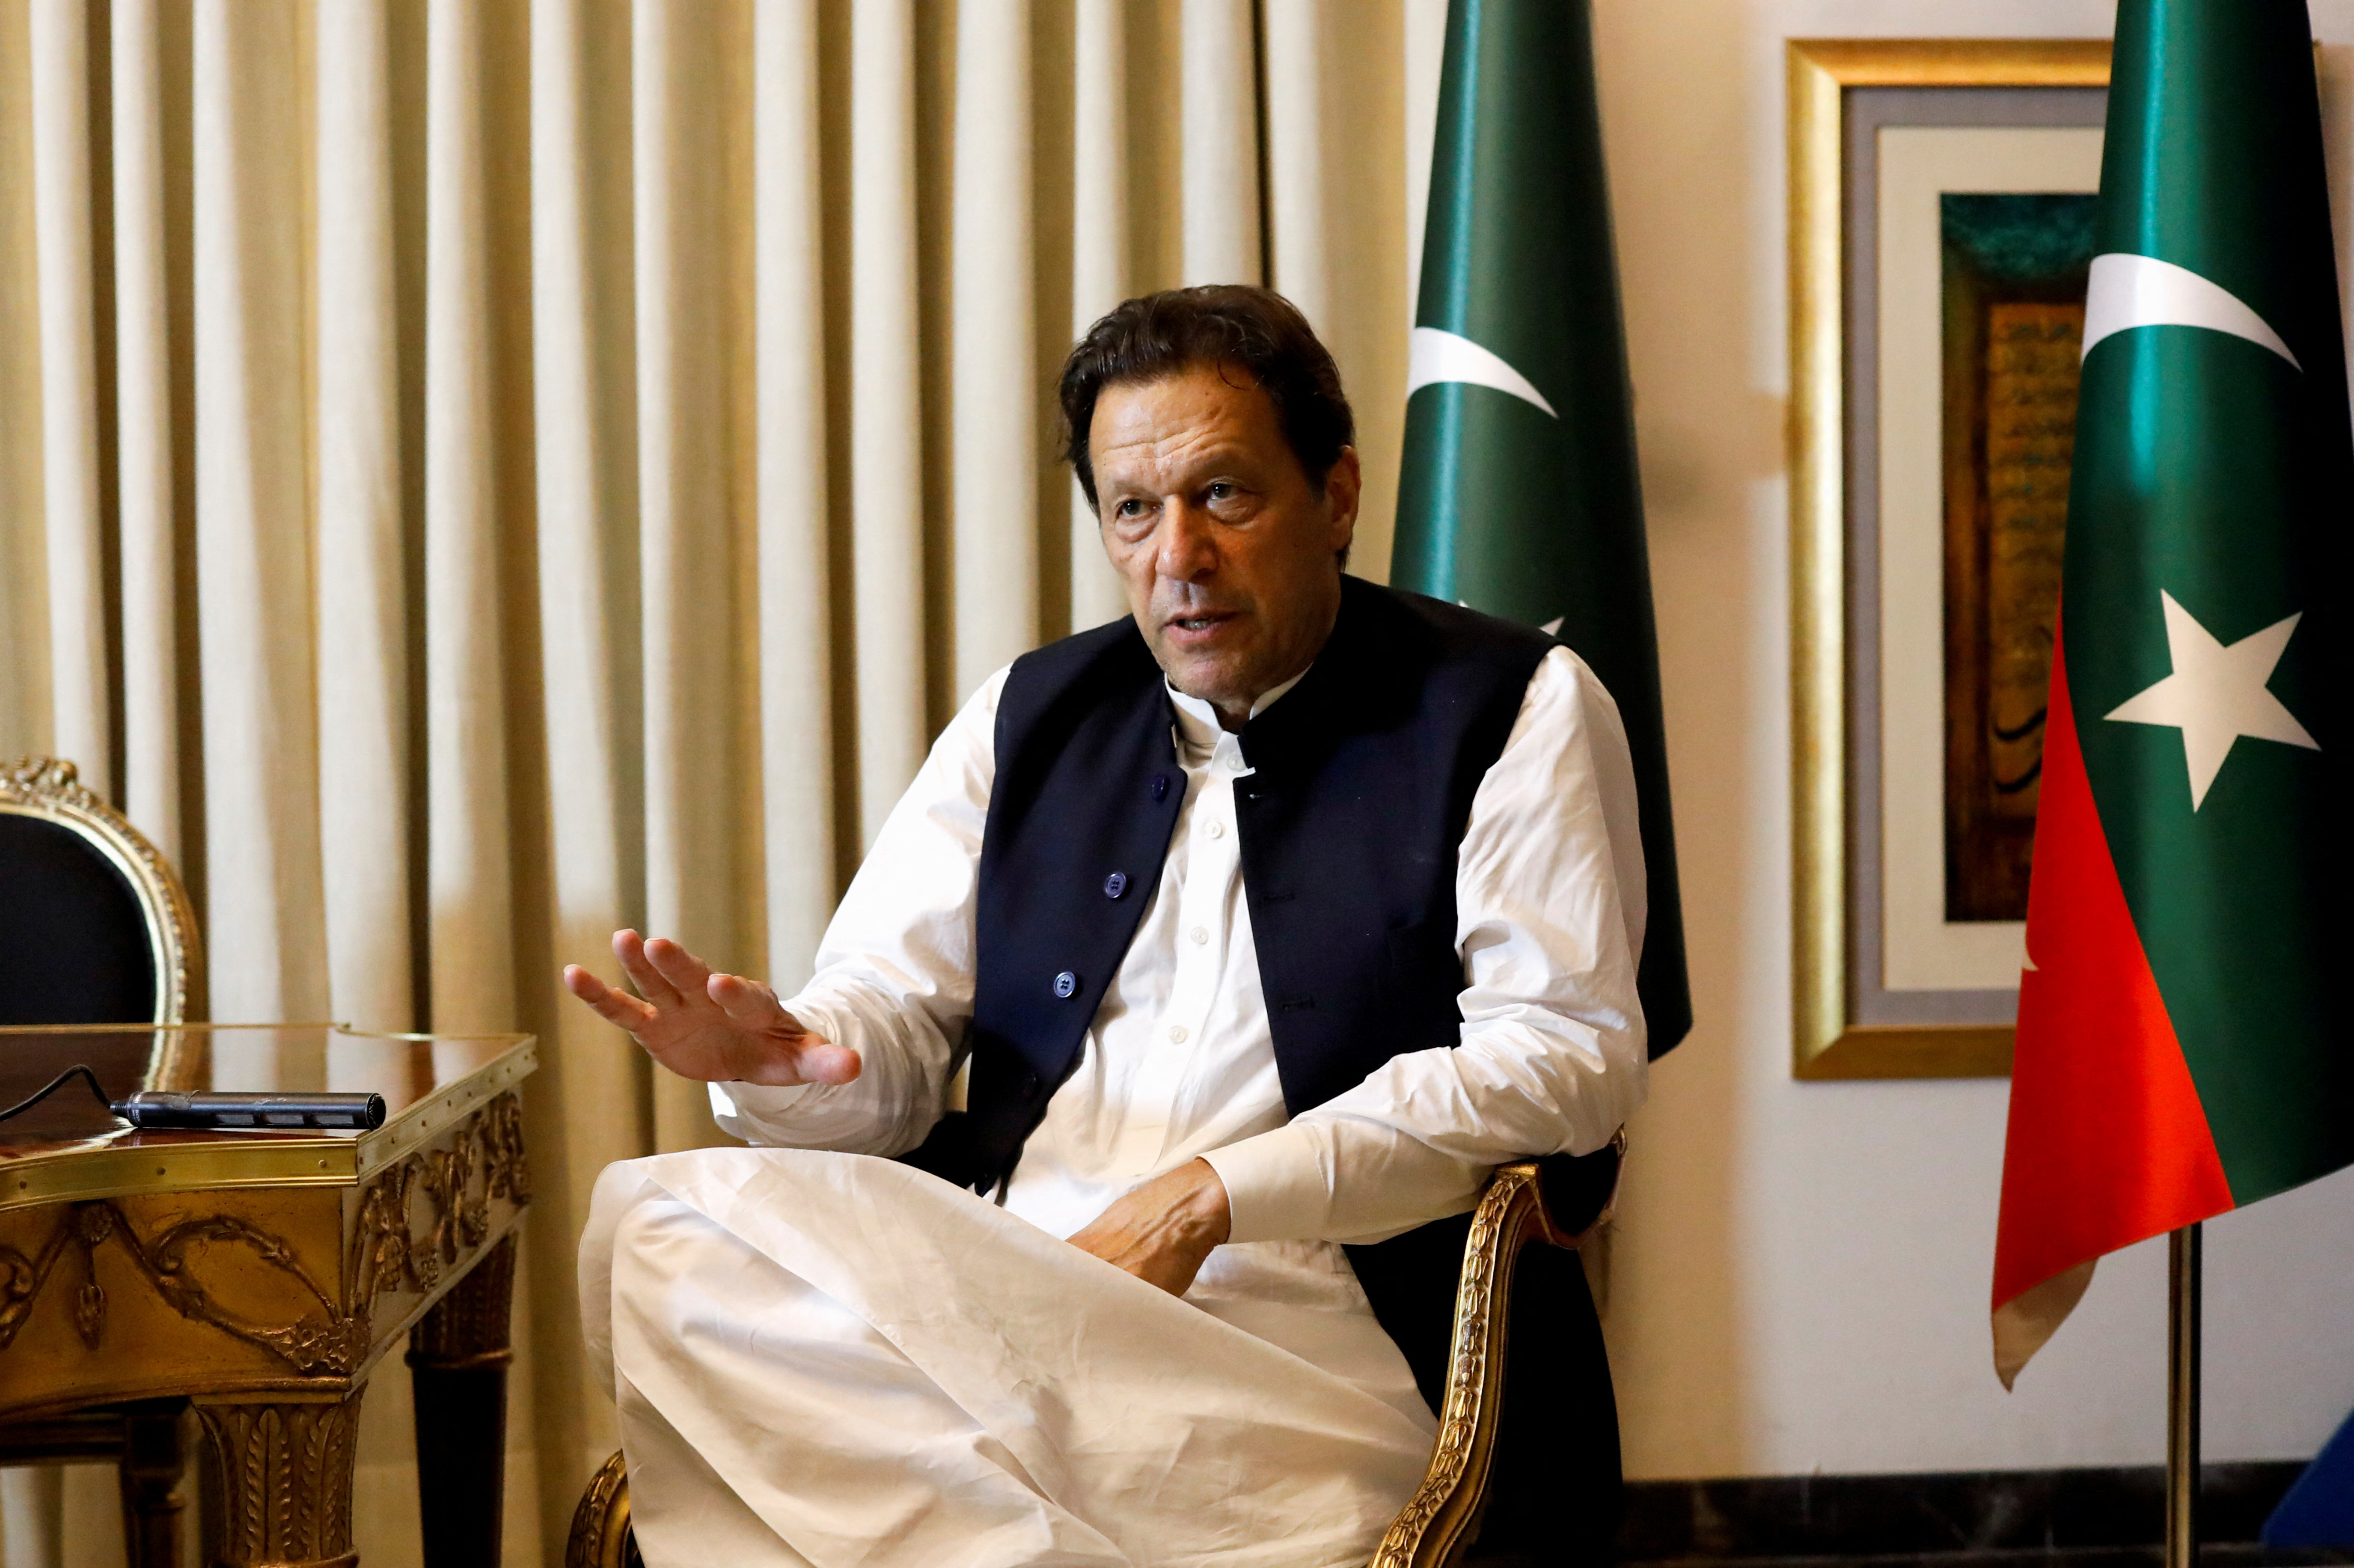 Former Pakistani PM Imran Khan speaks with Reuters during an intervew, in Lahore